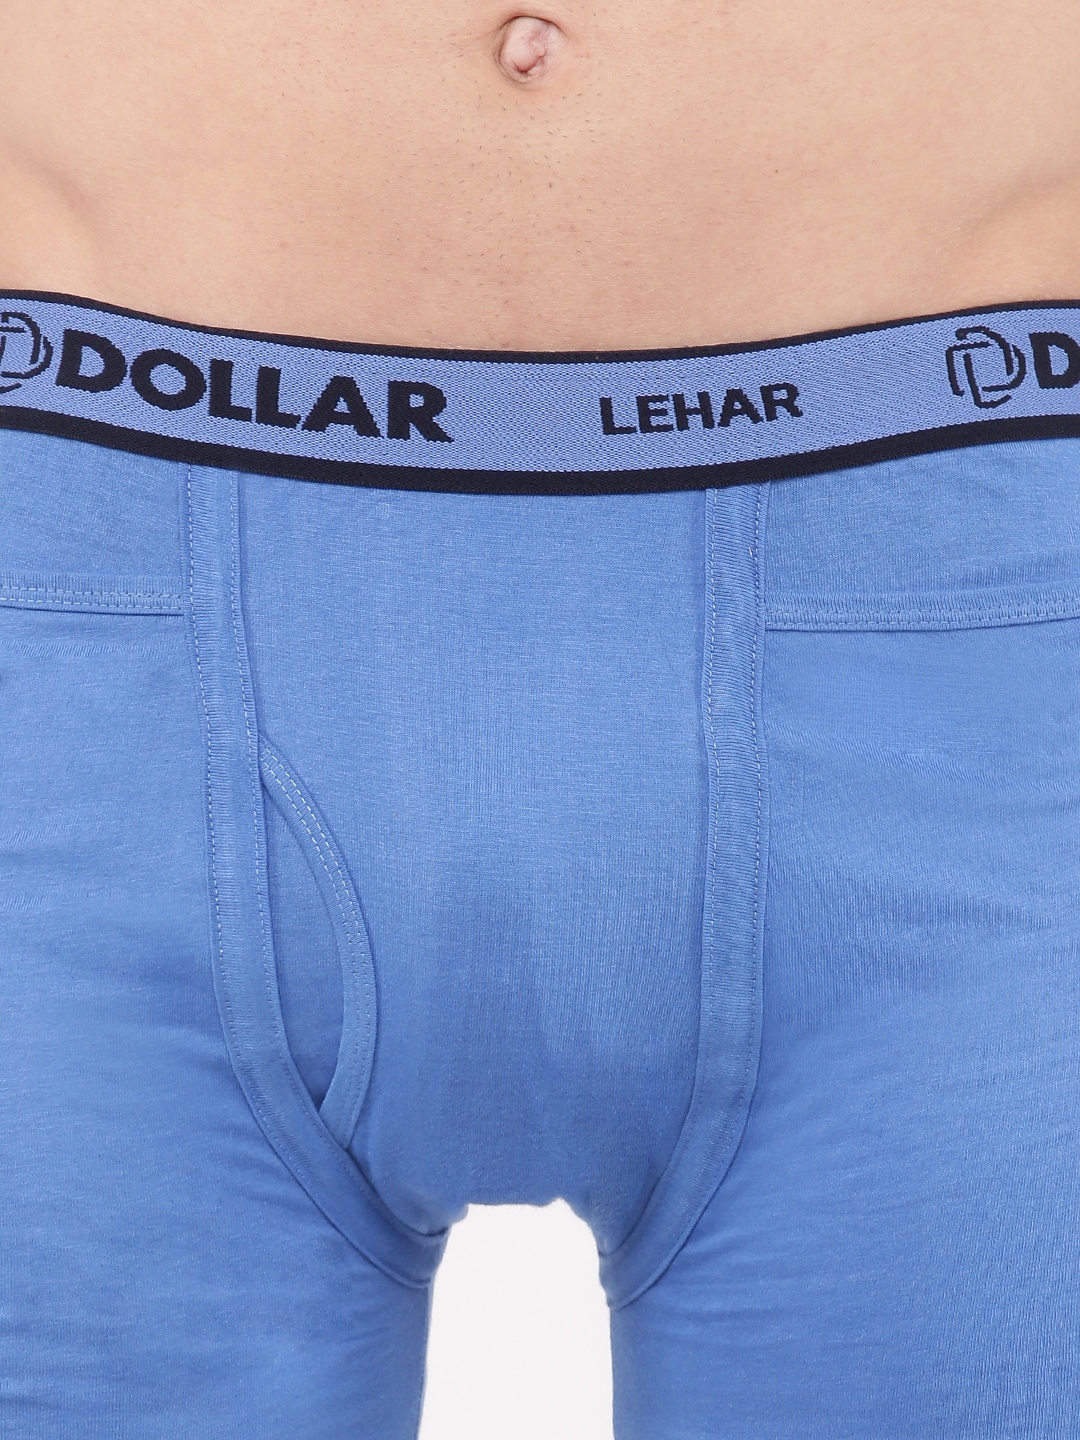 Buy DOLLAR Lehar Men's Assorted Solid 100% Cotton Pack of 5 Trunks Online  at Best Prices in India - JioMart.